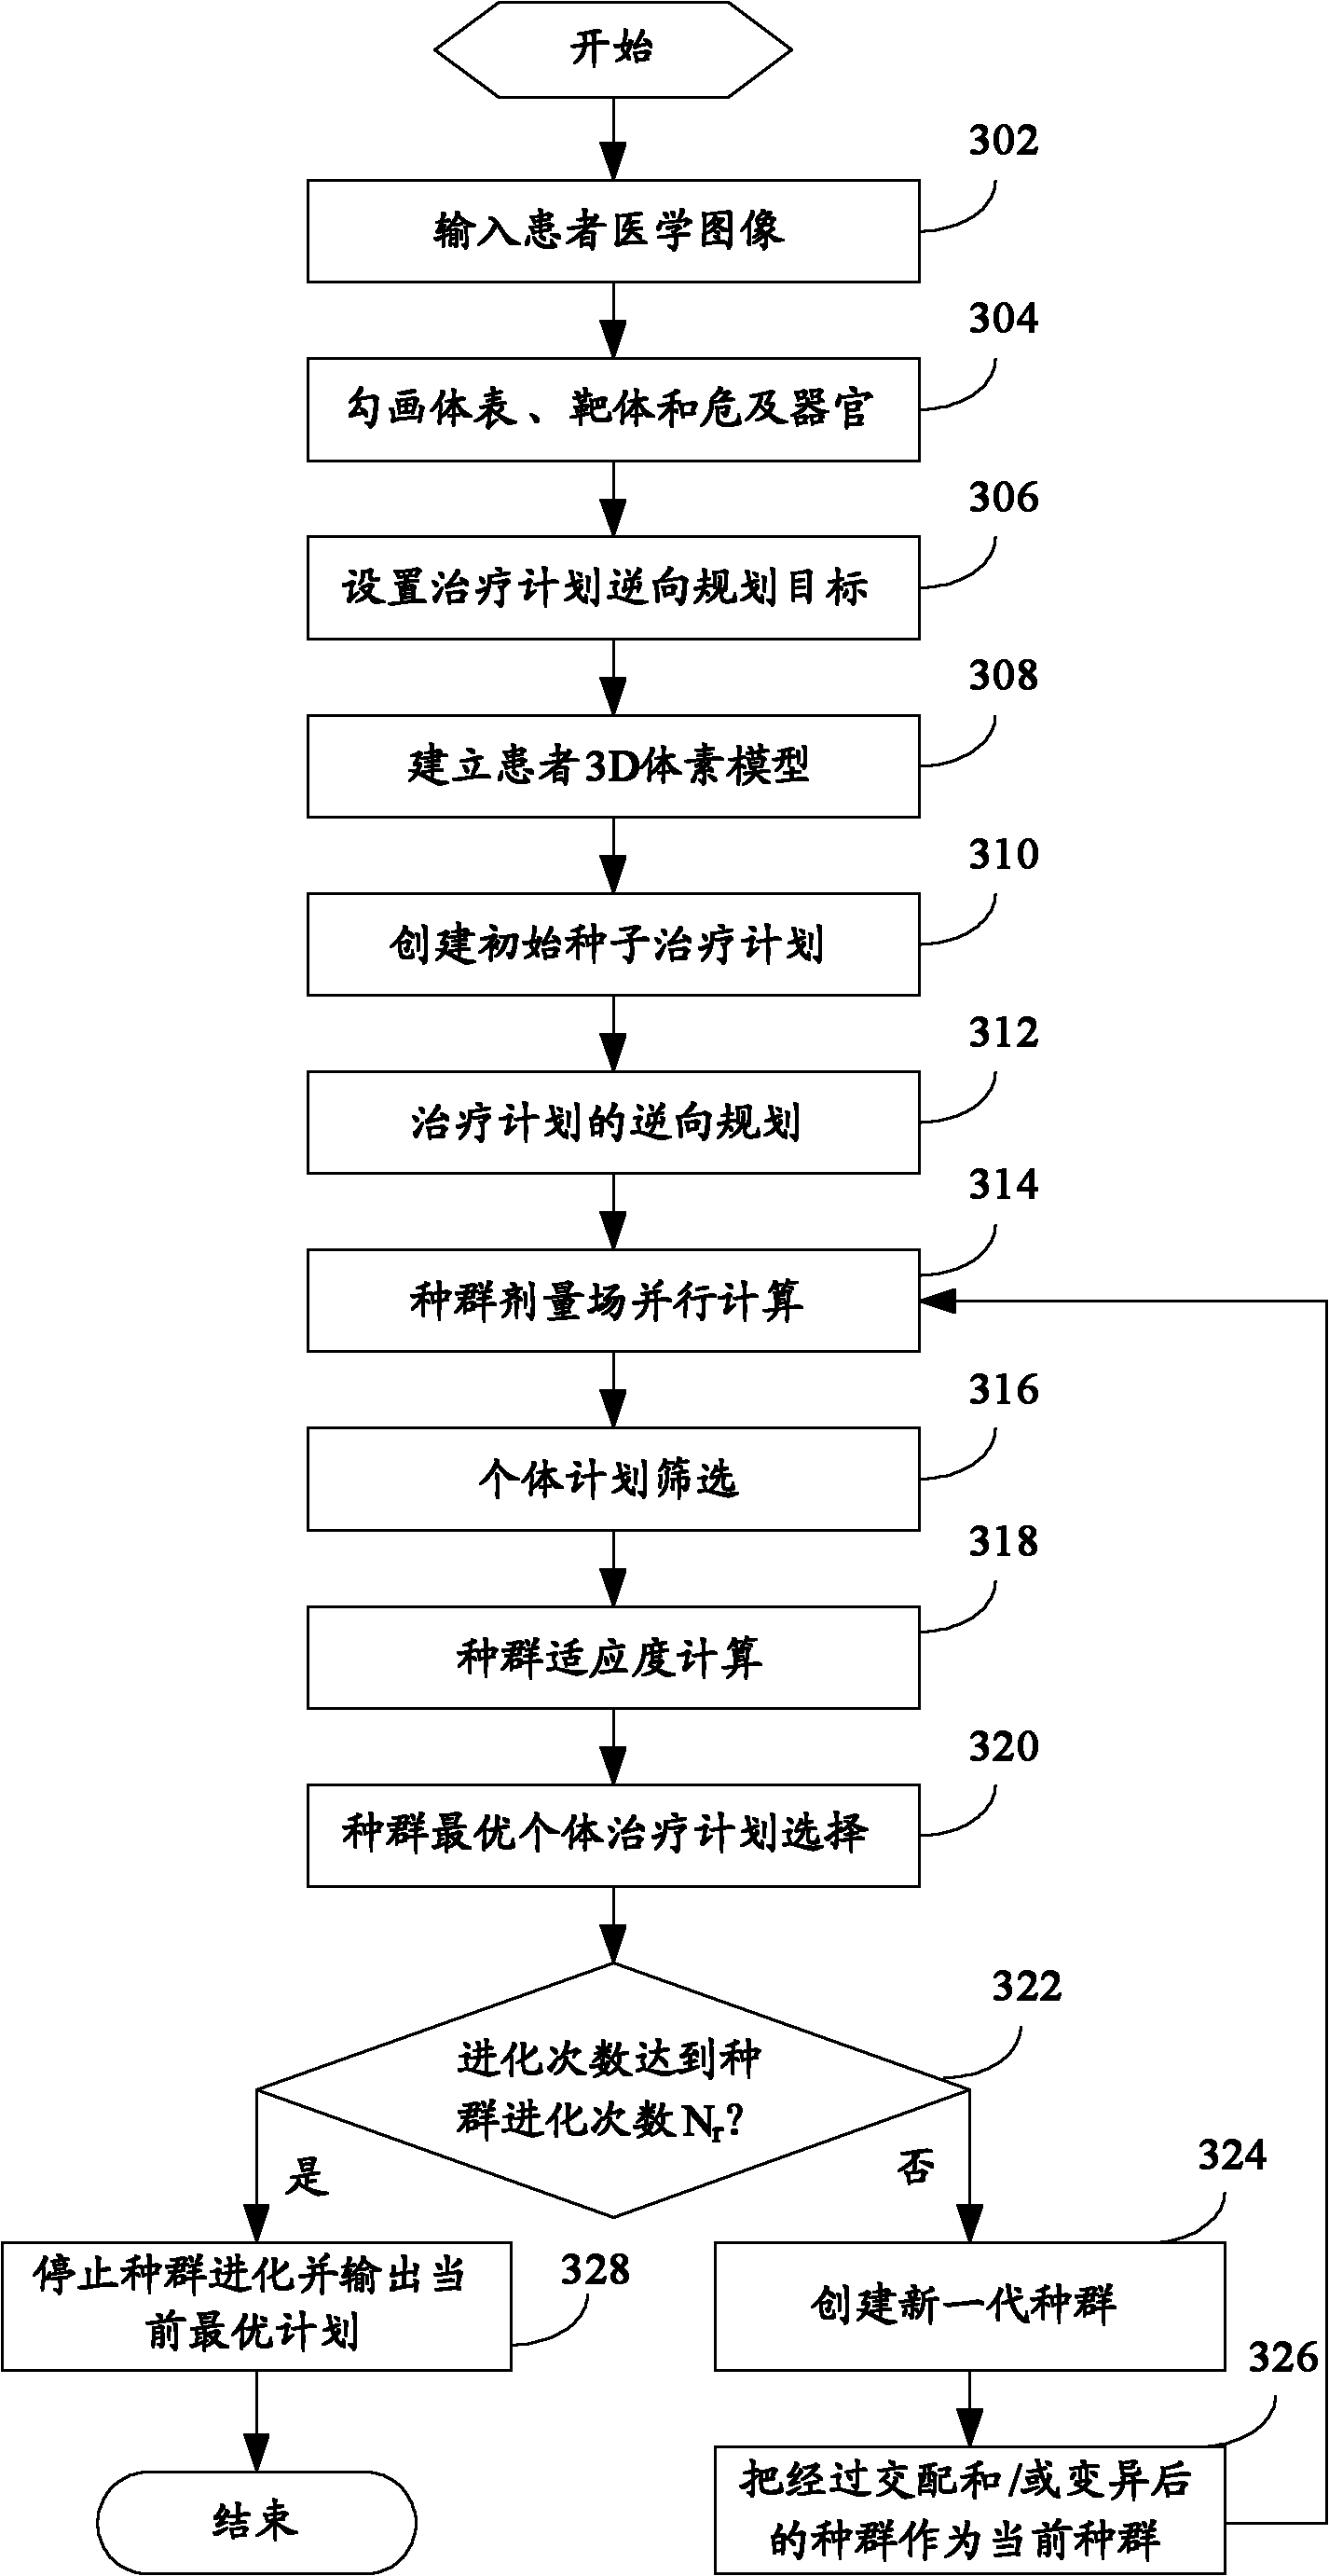 Reverse planning method for treatment plan and treatment plan system